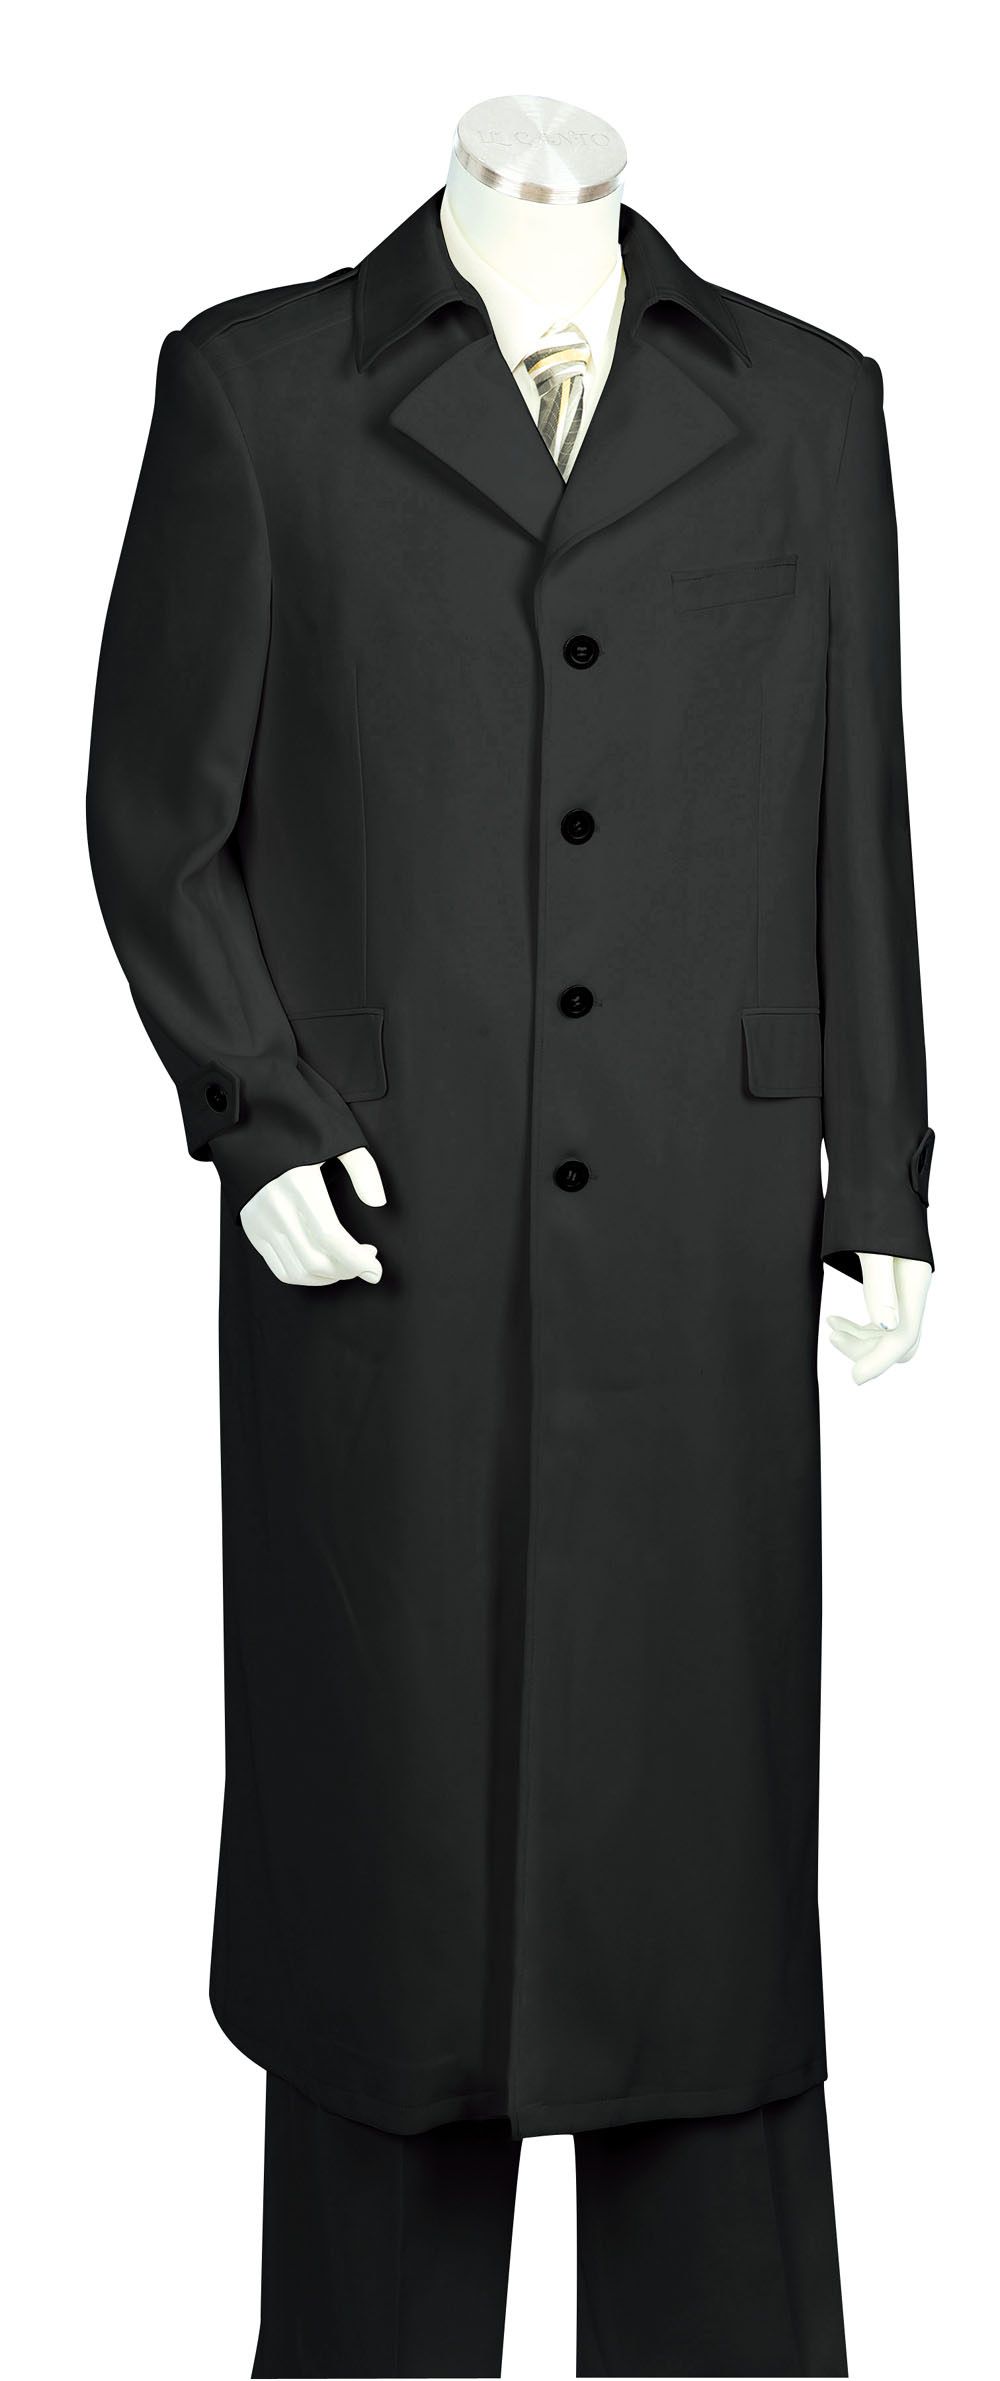 Canto Men's 2 Piece Urban Zoot Suit with Pleated Coattail Award Winning Design